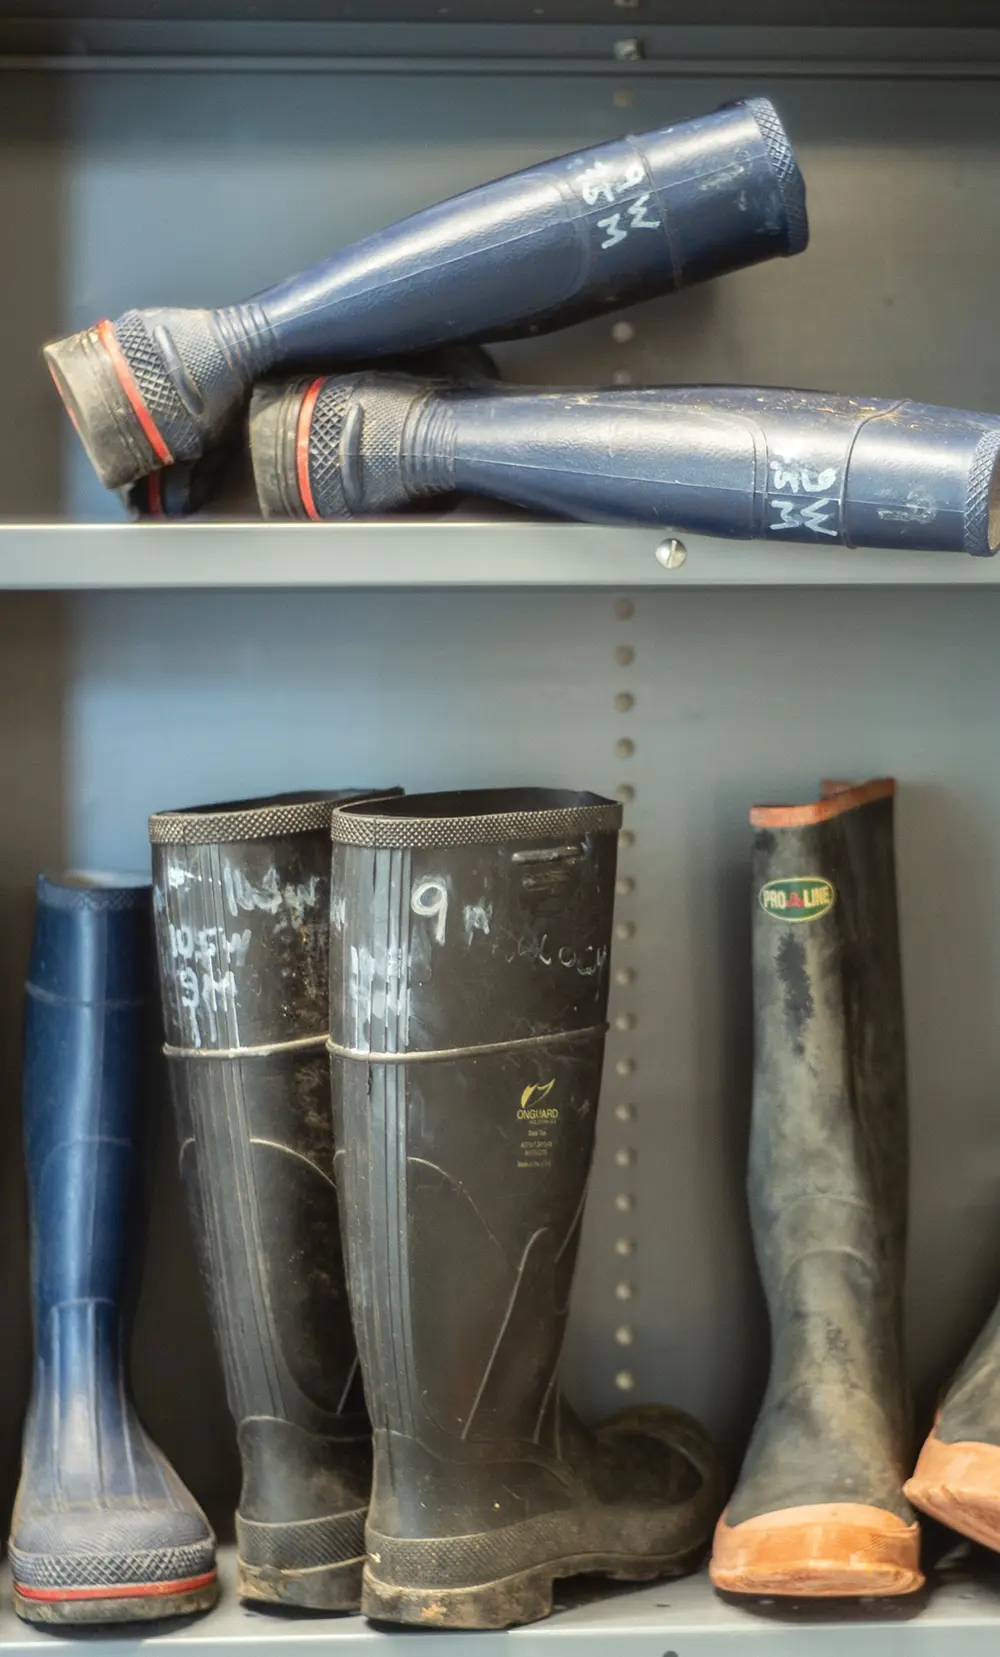 Group of some rubber boots displayed on a grey colored metal locker shelf (pairs in rusty/dirty all-black, black/tan, and blue/red)